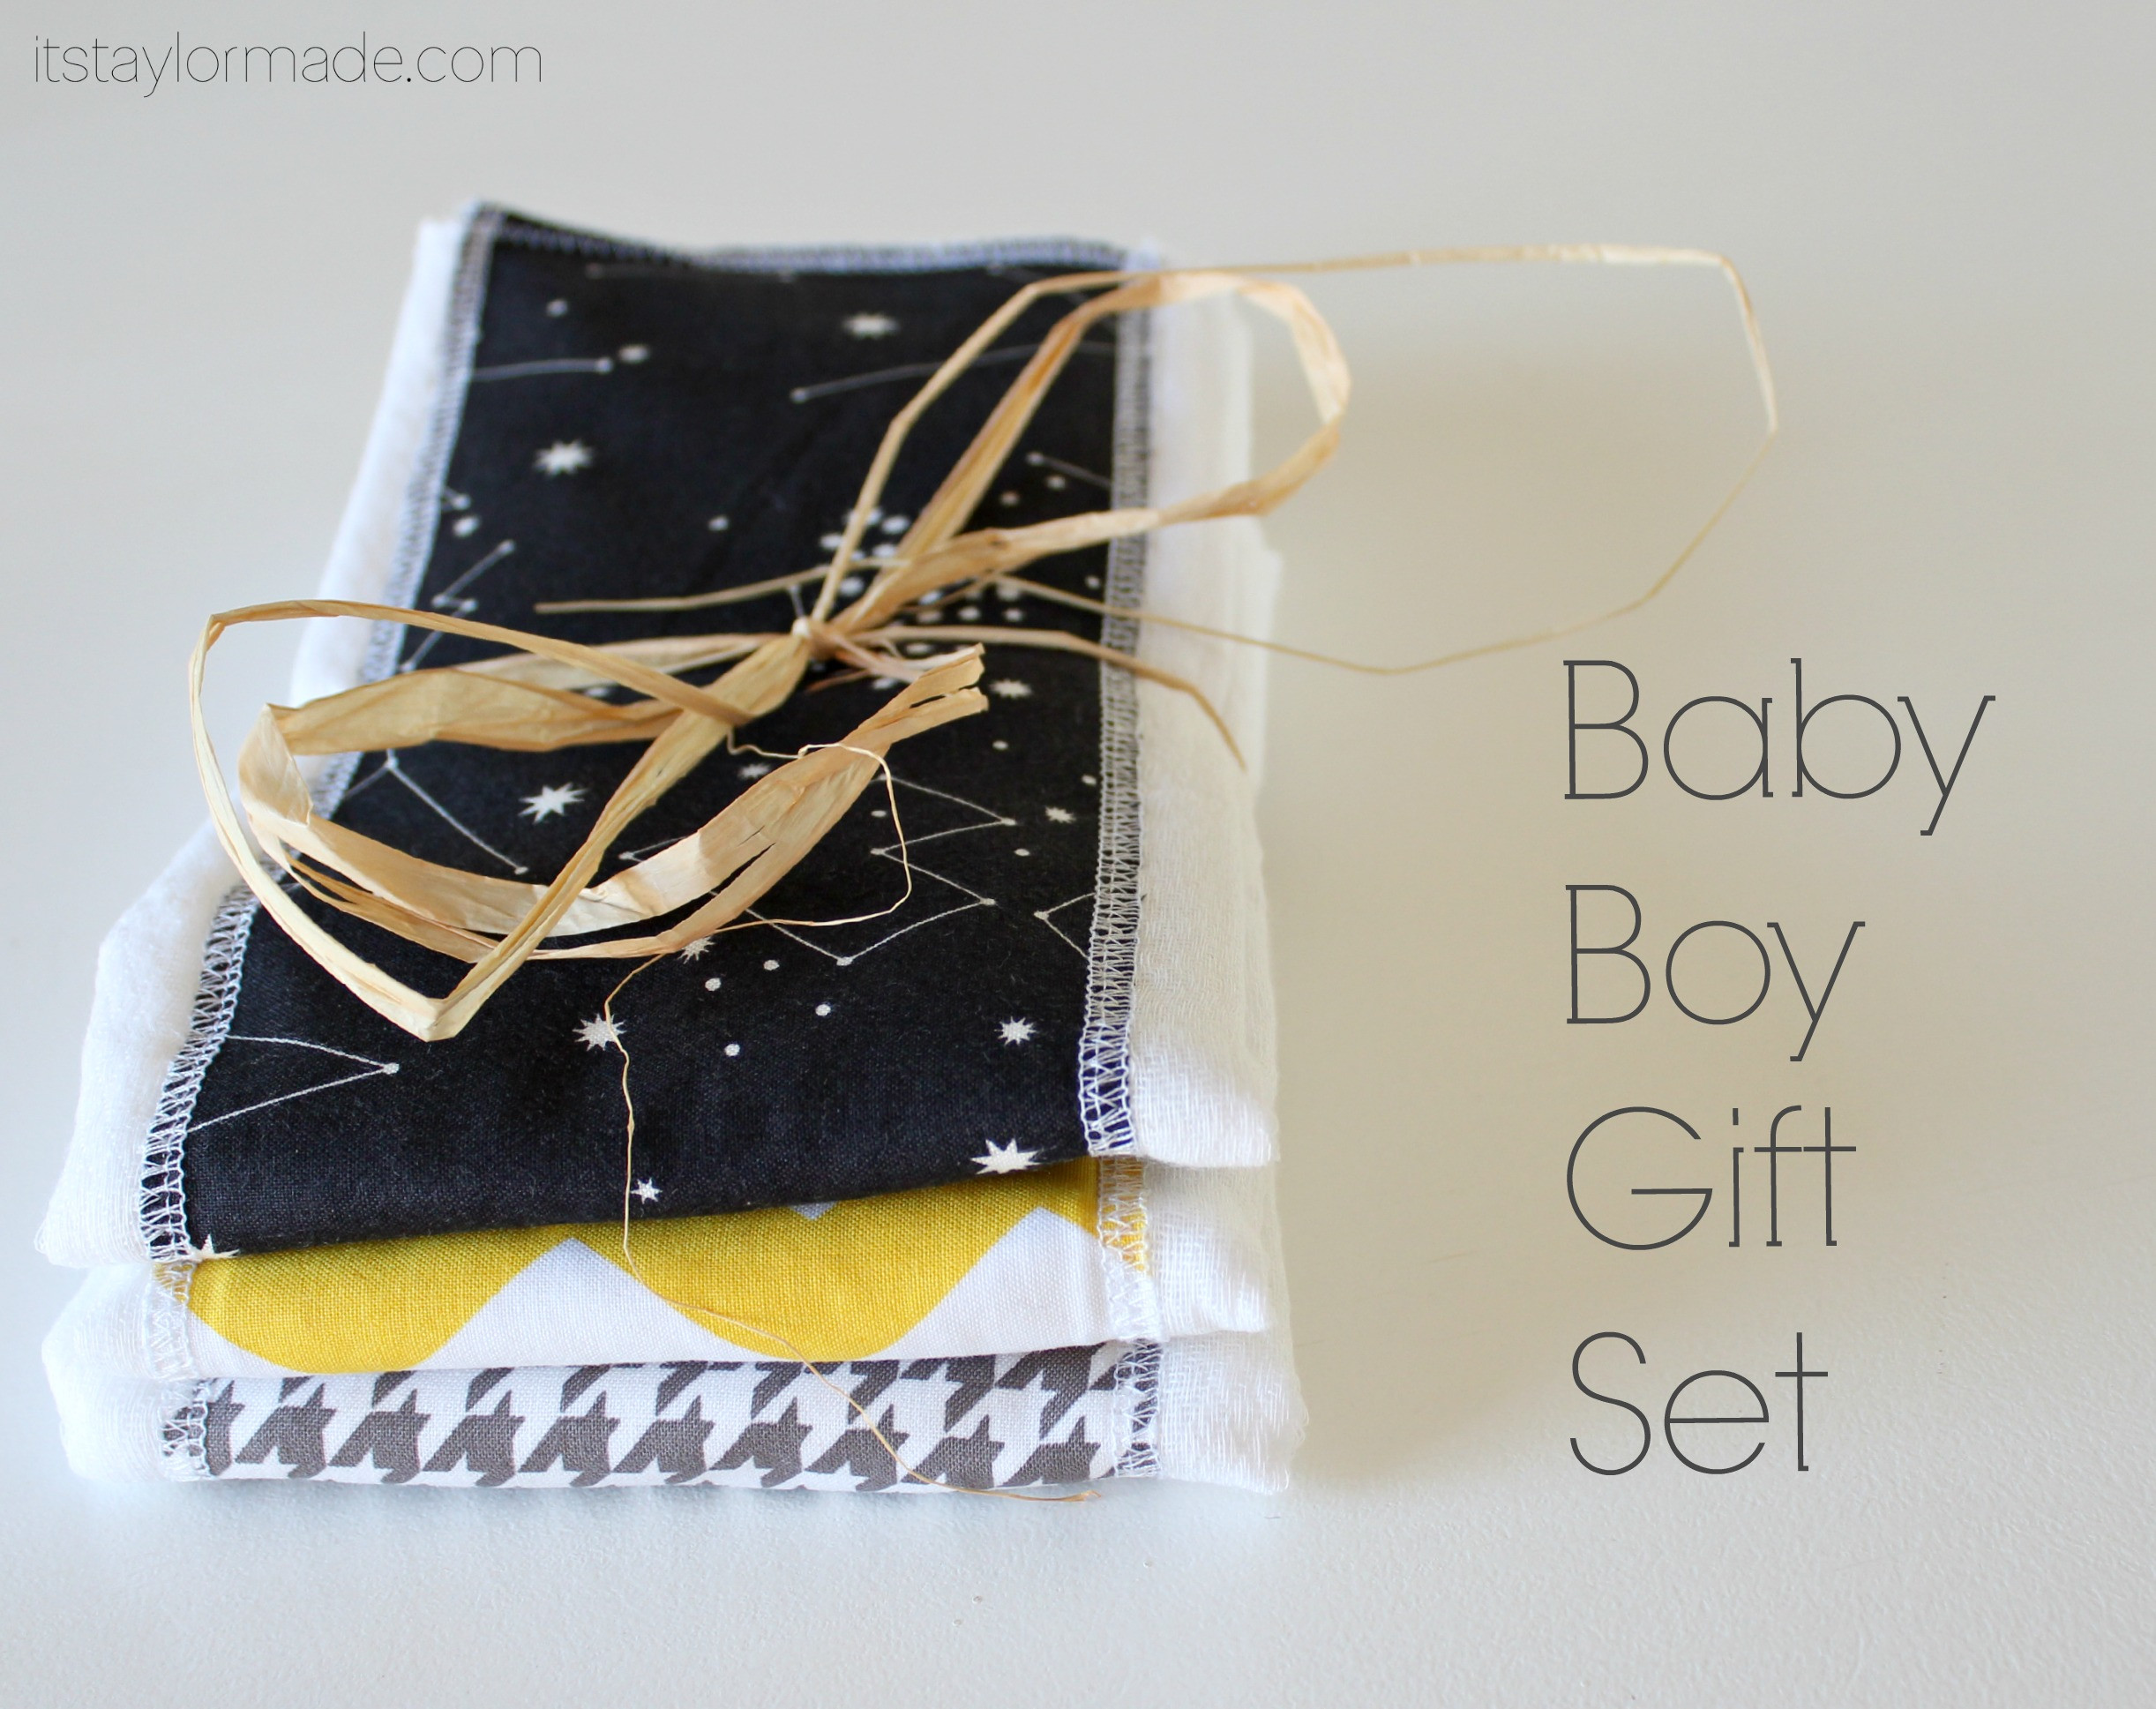 Handmade Gifts For Baby Boy
 Baby Boy Gift Set TaylorMade